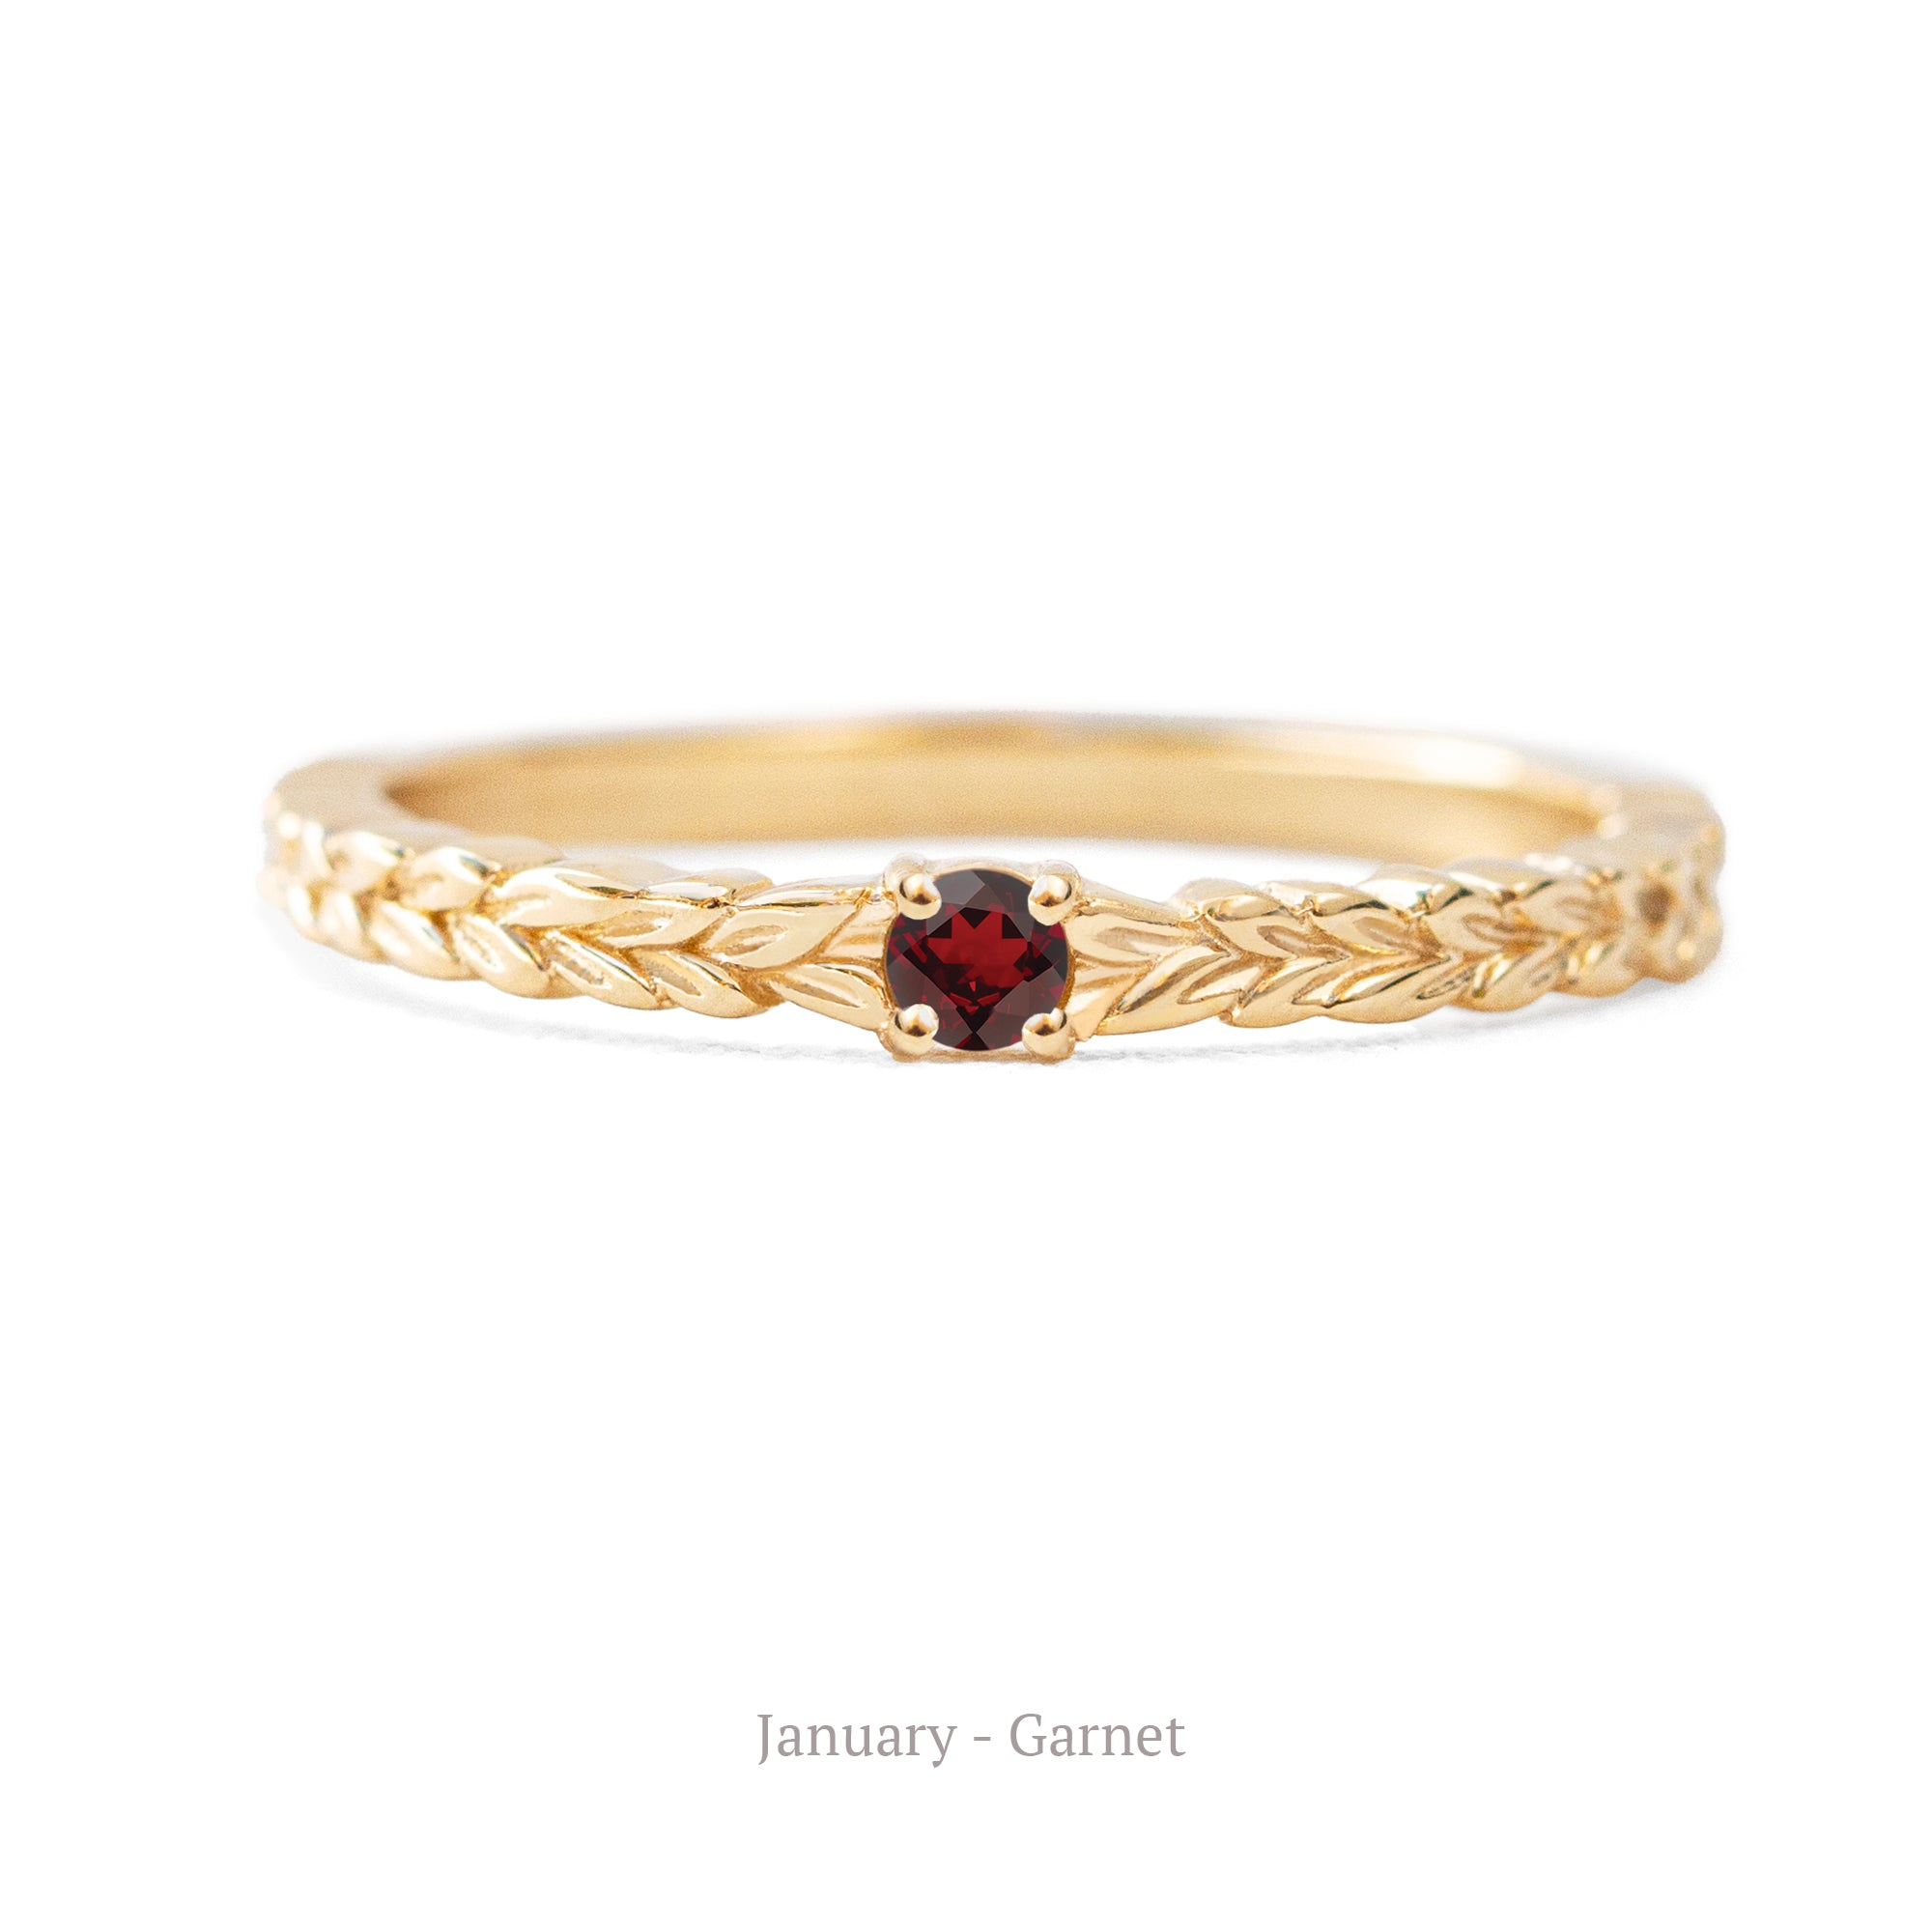 Jamie Park Jewelry - Meadow Birthstone Ring Celebrate your or special one's birthday with the Meadow Birthstone Ring in 14K gold. This versatile ring features the intricate Meadow pattern, adding effortless elegance to your everyday outfits. With its sophisticated design, it's the perfect choice for any occasion - from casual to formal.&nbsp;